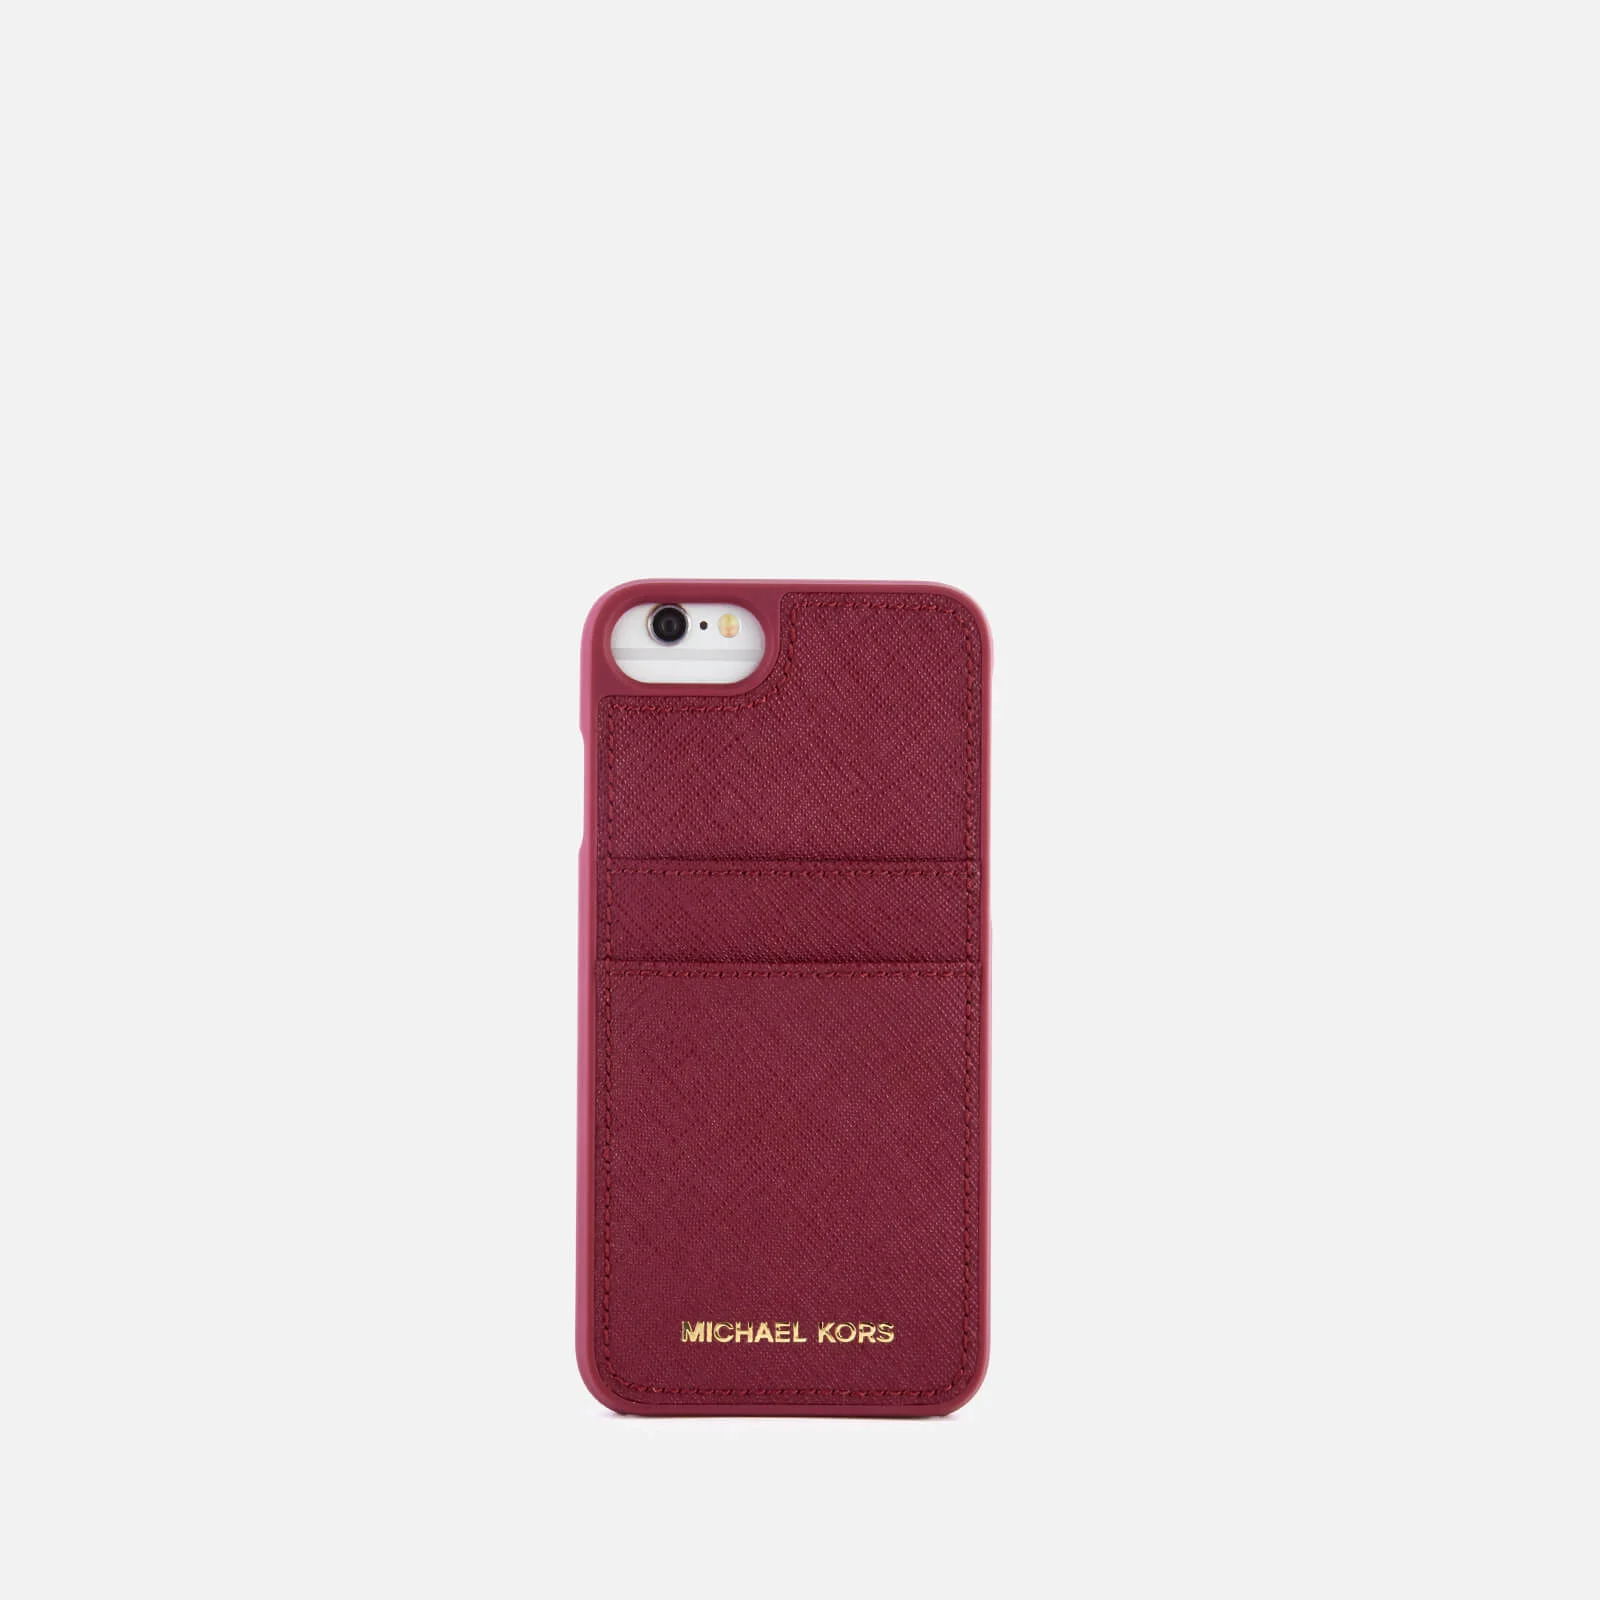 MICHAEL MICHAEL KORS Women's Leather iPhone 7 Cover - Mulberry Image 1